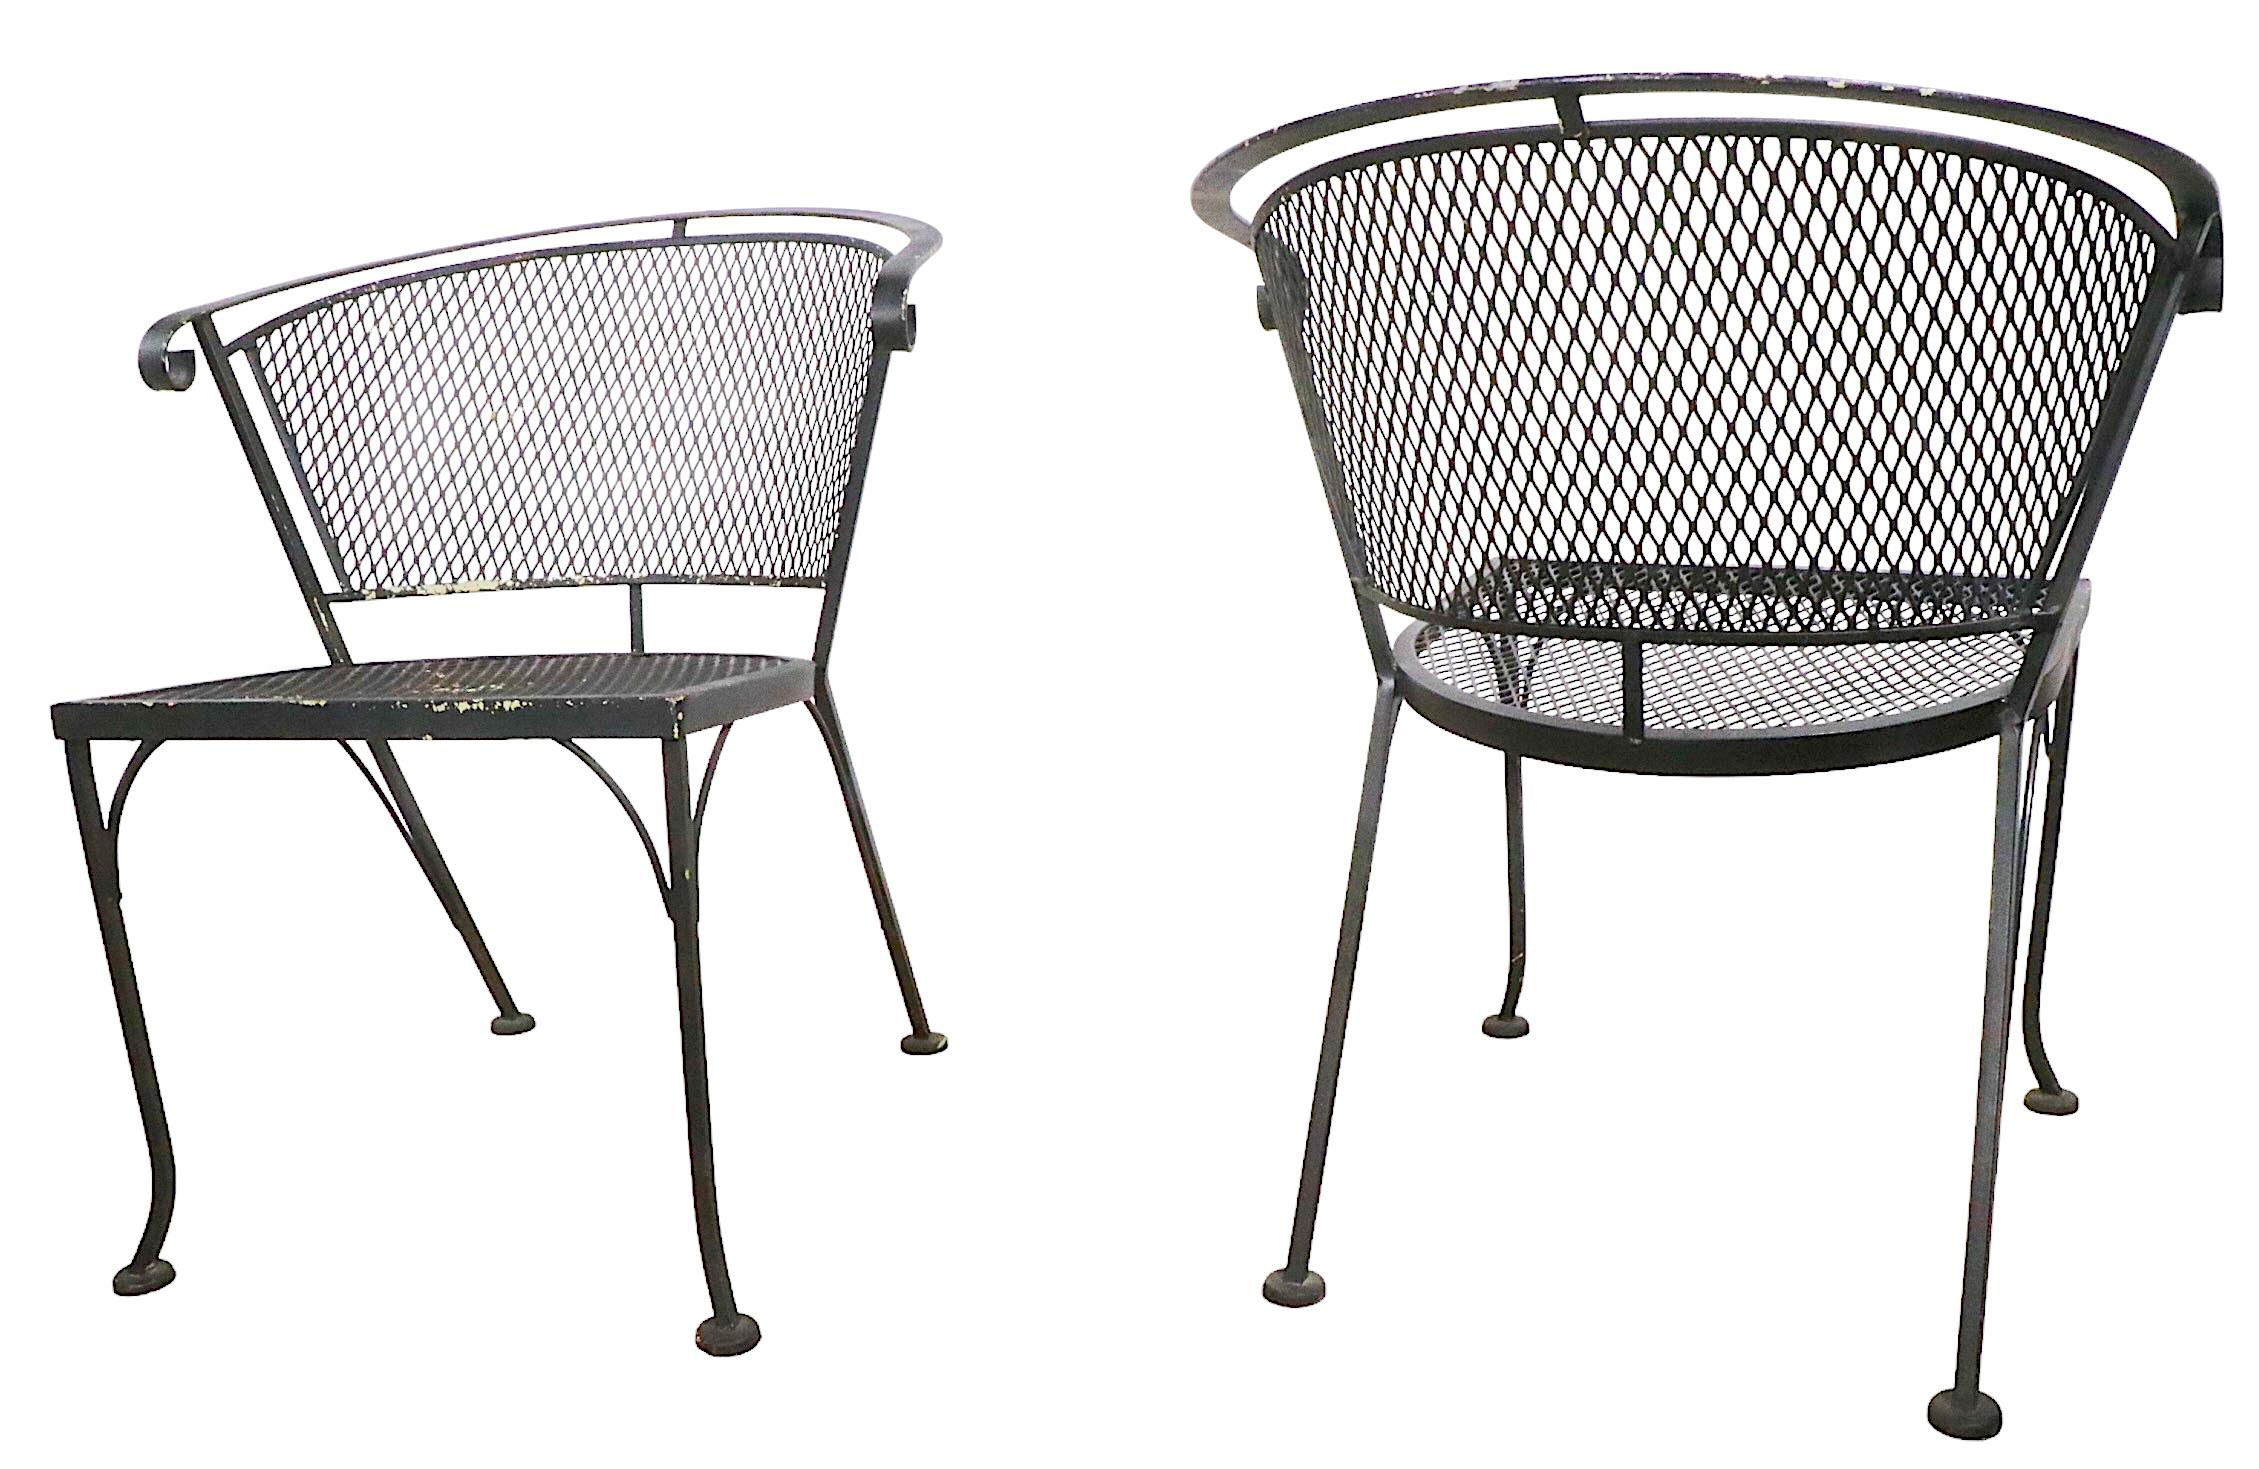 Pair of vintage Garden, Patio, Poolside armchairs attributed to Salterini. The chairs feature metal mesh seats and backs, with wrought iron frames. Both are in good original condition, showing only light cosmetic wear, normal and consistent with